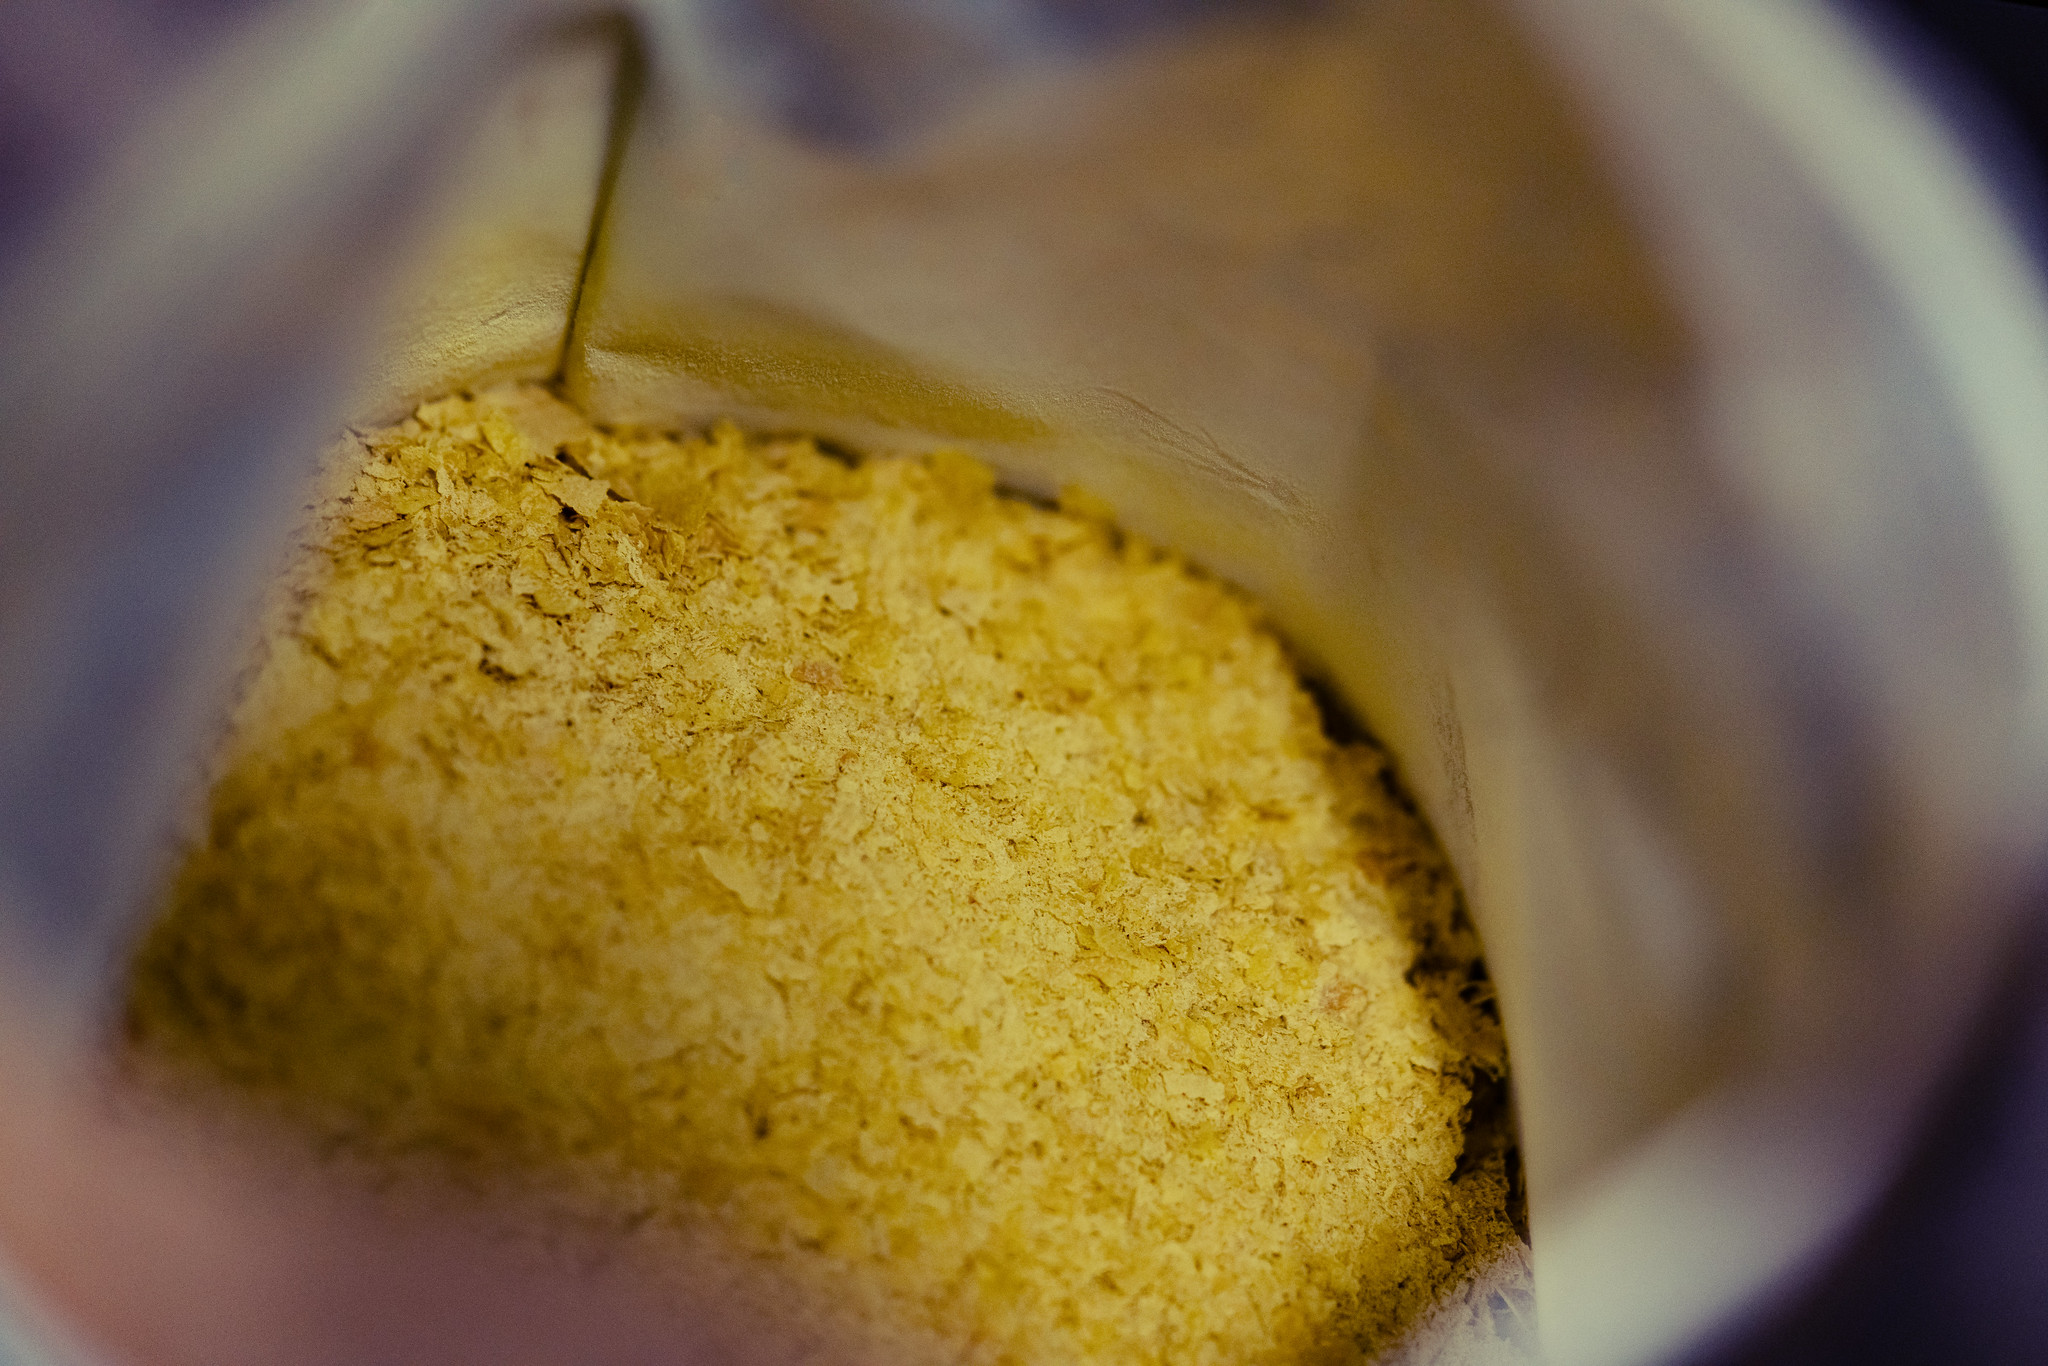 A bag of nutritional yeast.  Image: Tony Webster/Flickr